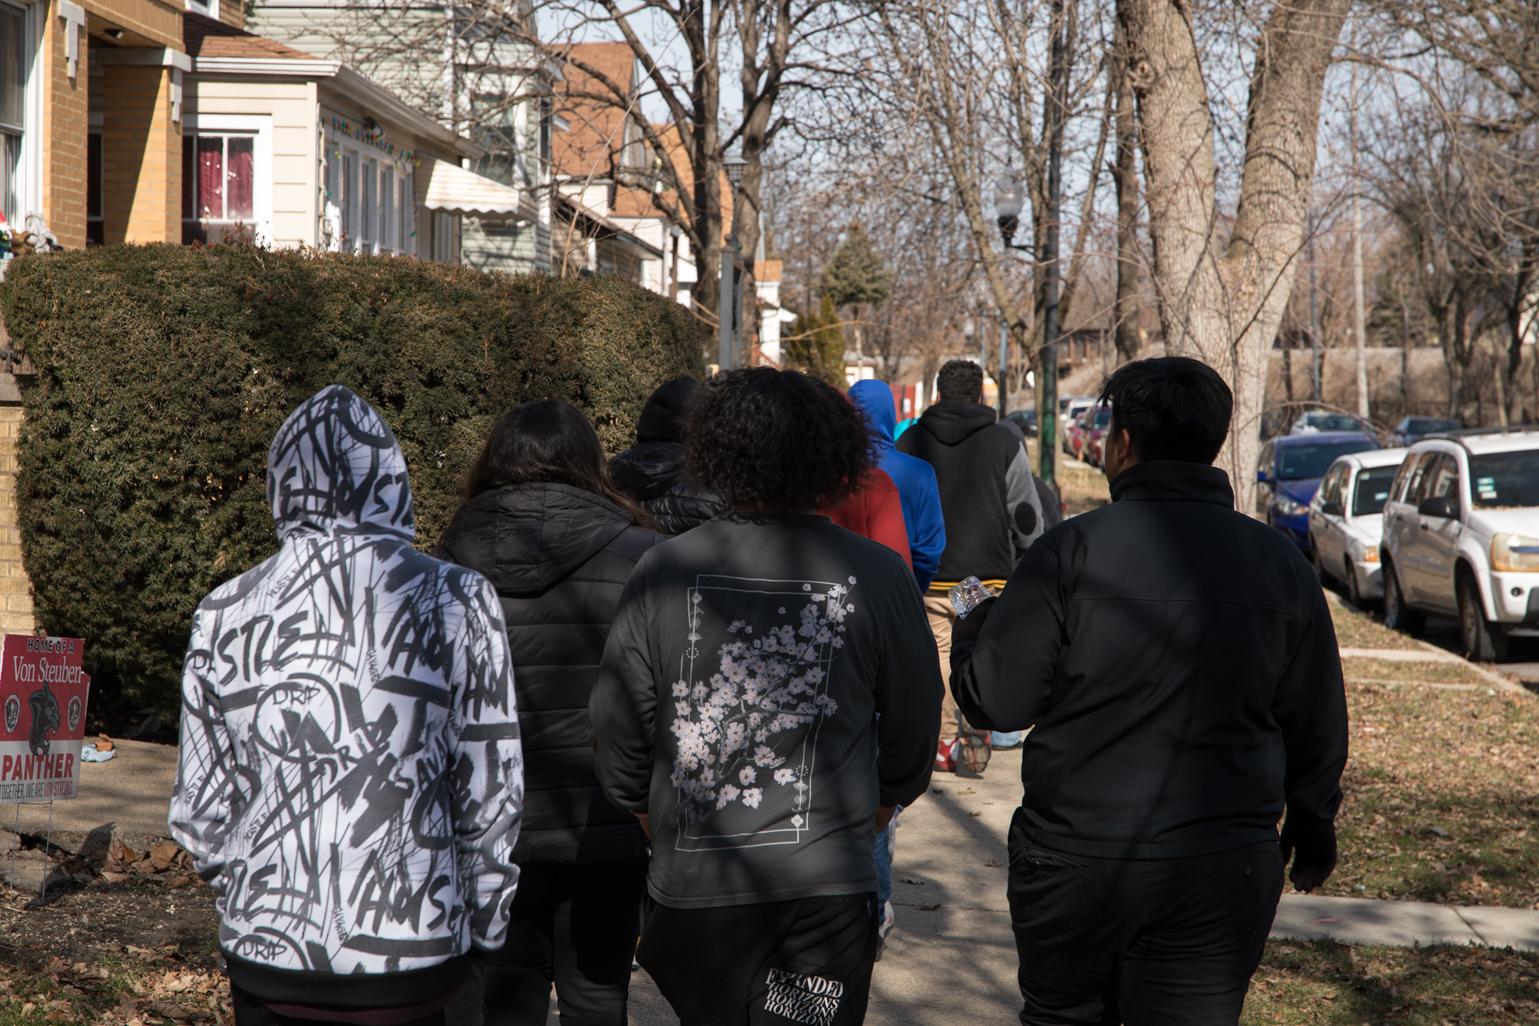 On Feb. 21, 2023, A group of Kelvyn Park High School seniors walk down Kostner Avenue to an early polling location at Kilbourn Park as part of a Chicago Votes “Parade to the Polls” initiative to register students to vote and cast their ballot. (Michael Izquierdo / WTTW News)